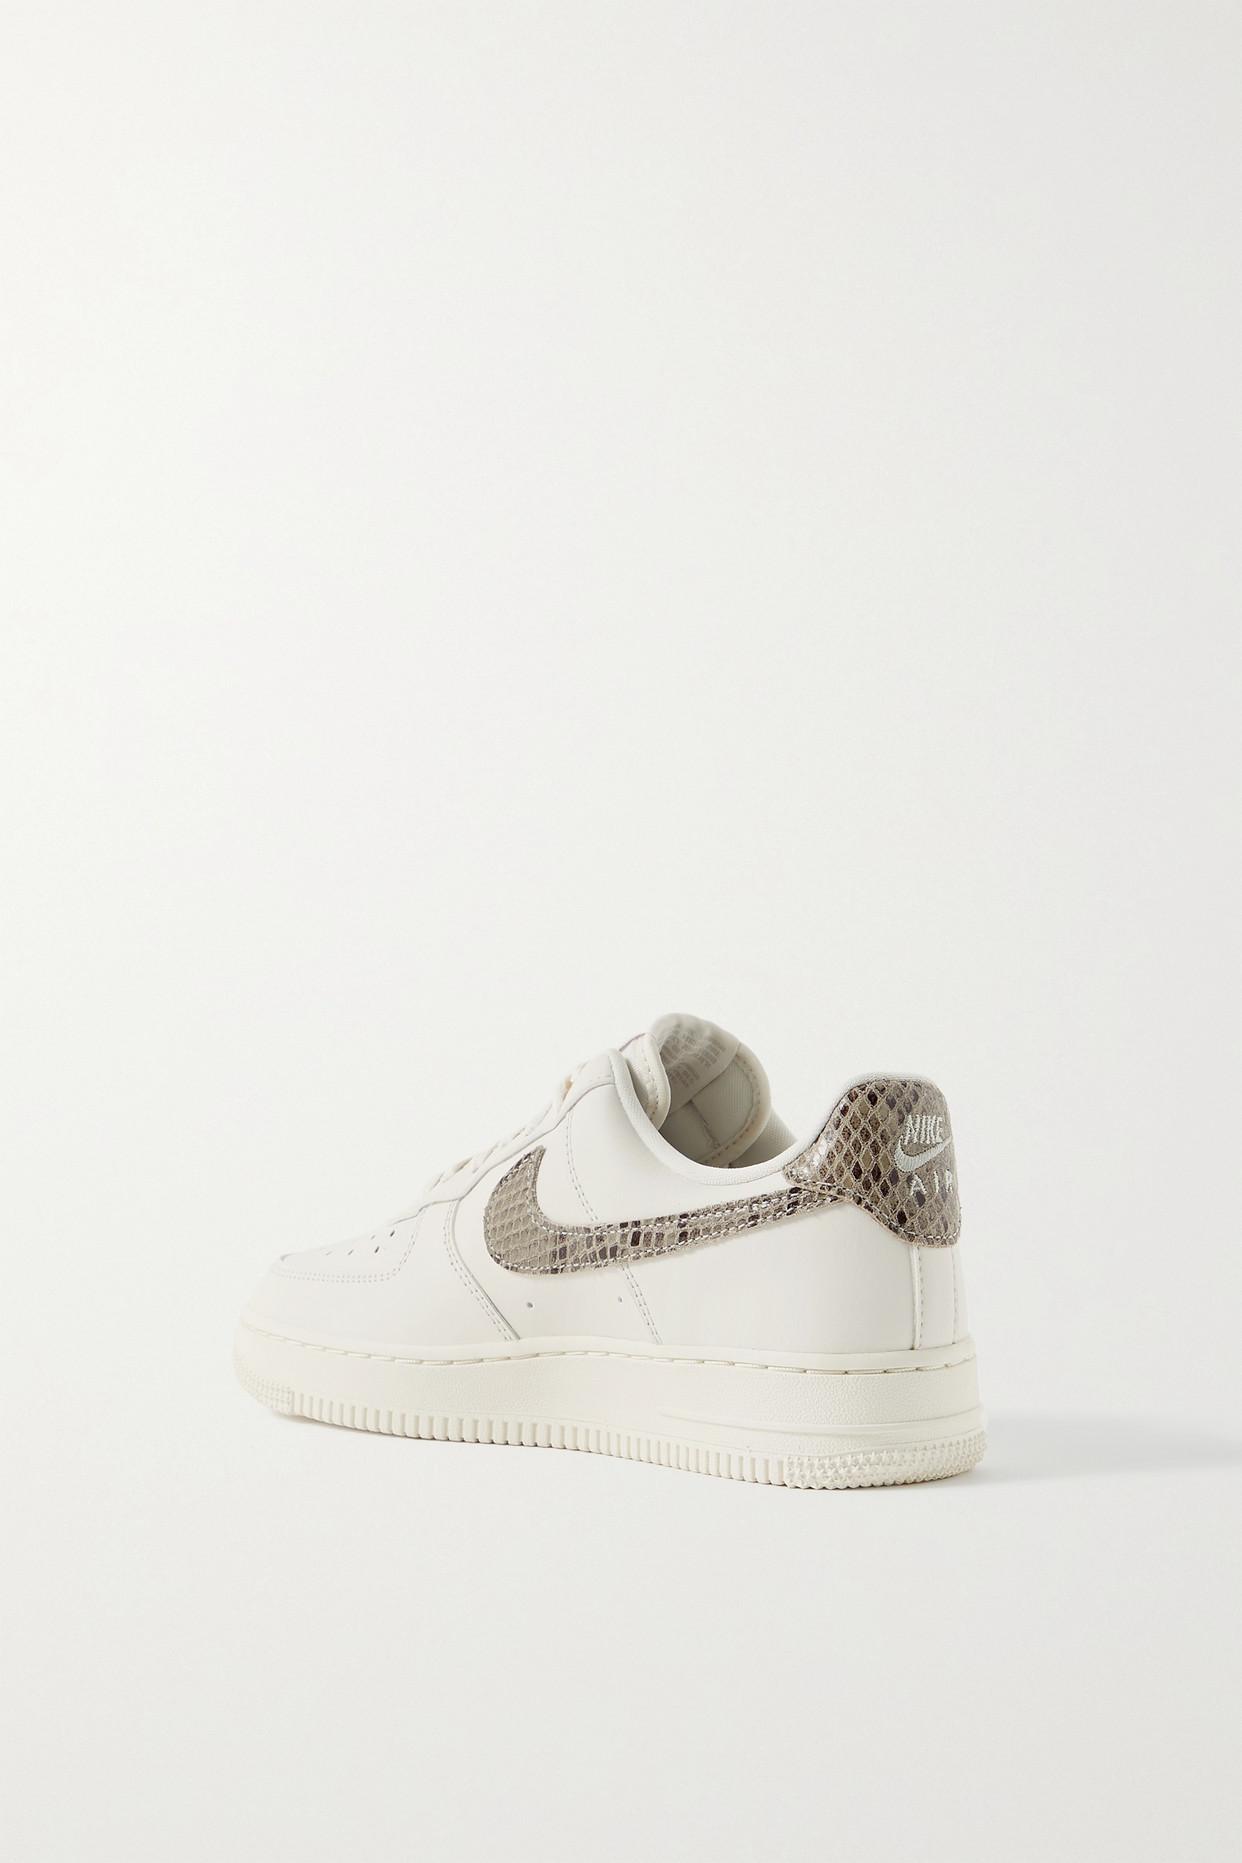 Panorama corazón Rápido Nike Air Force 1 '07 Snake Effect-trimmed Leather Sneakers in White | Lyst